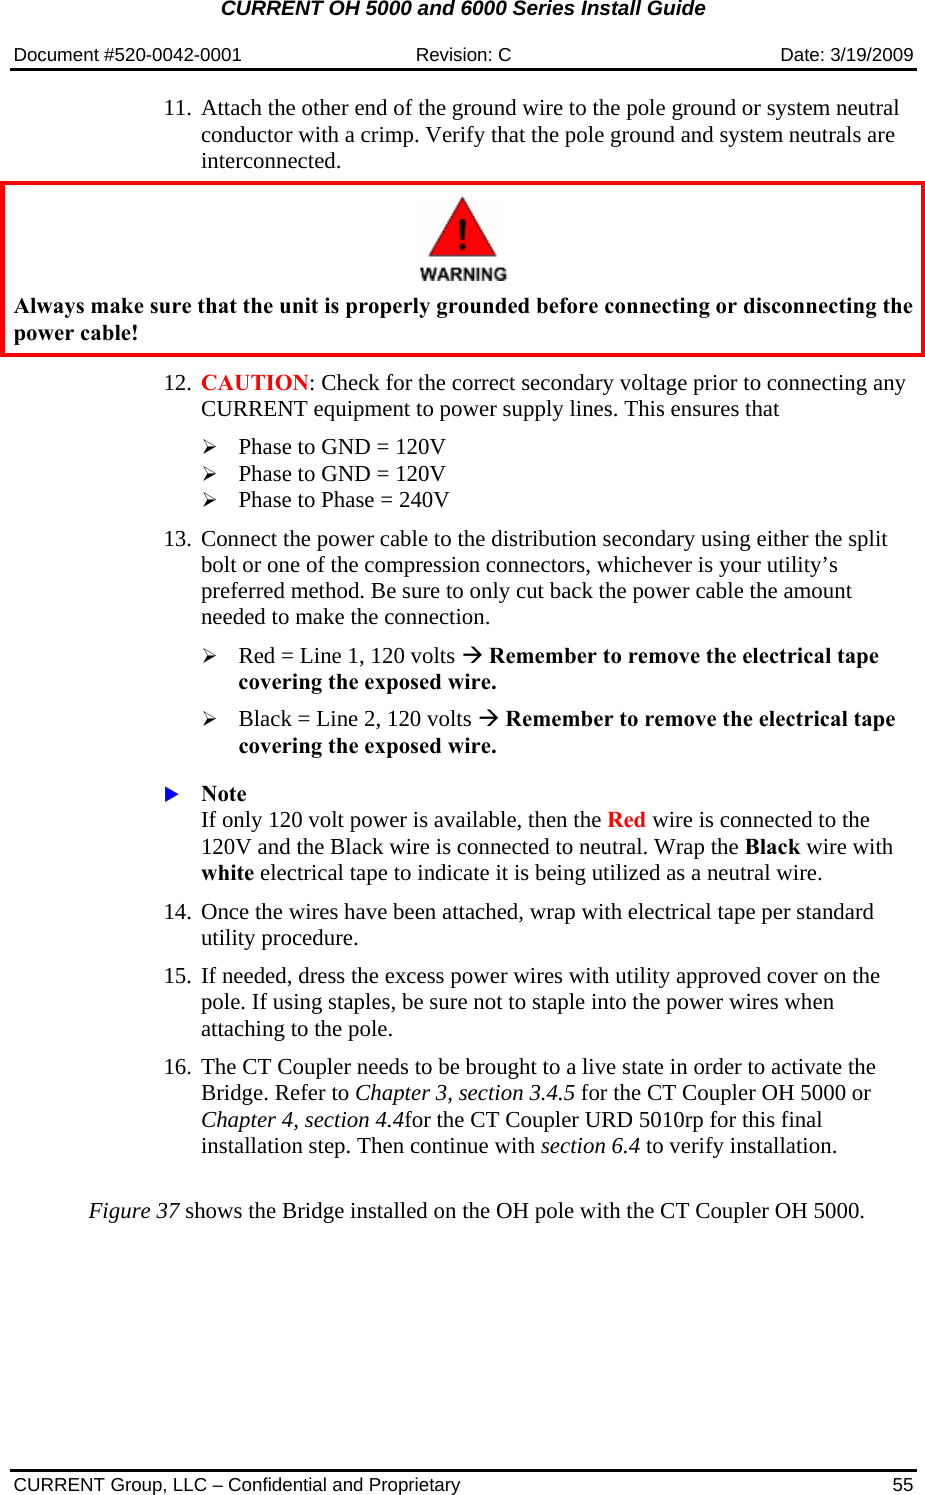 CURRENT OH 5000 and 6000 Series Install Guide  Document #520-0042-0001  Revision: C  Date: 3/19/2009  CURRENT Group, LLC – Confidential and Proprietary  55 11. Attach the other end of the ground wire to the pole ground or system neutral conductor with a crimp. Verify that the pole ground and system neutrals are interconnected.     Always make sure that the unit is properly grounded before connecting or disconnecting the power cable!   12. CAUTION: Check for the correct secondary voltage prior to connecting any CURRENT equipment to power supply lines. This ensures that   ¾ Phase to GND = 120V ¾ Phase to GND = 120V ¾ Phase to Phase = 240V  13. Connect the power cable to the distribution secondary using either the split bolt or one of the compression connectors, whichever is your utility’s preferred method. Be sure to only cut back the power cable the amount needed to make the connection.  ¾ Red = Line 1, 120 volts Æ Remember to remove the electrical tape covering the exposed wire. ¾ Black = Line 2, 120 volts Æ Remember to remove the electrical tape covering the exposed wire.  X Note If only 120 volt power is available, then the Red wire is connected to the 120V and the Black wire is connected to neutral. Wrap the Black wire with white electrical tape to indicate it is being utilized as a neutral wire.  14. Once the wires have been attached, wrap with electrical tape per standard utility procedure.  15. If needed, dress the excess power wires with utility approved cover on the pole. If using staples, be sure not to staple into the power wires when attaching to the pole.  16. The CT Coupler needs to be brought to a live state in order to activate the Bridge. Refer to Chapter 3, section 3.4.5 for the CT Coupler OH 5000 or Chapter 4, section 4.4for the CT Coupler URD 5010rp for this final installation step. Then continue with section 6.4 to verify installation.   Figure 37 shows the Bridge installed on the OH pole with the CT Coupler OH 5000. 